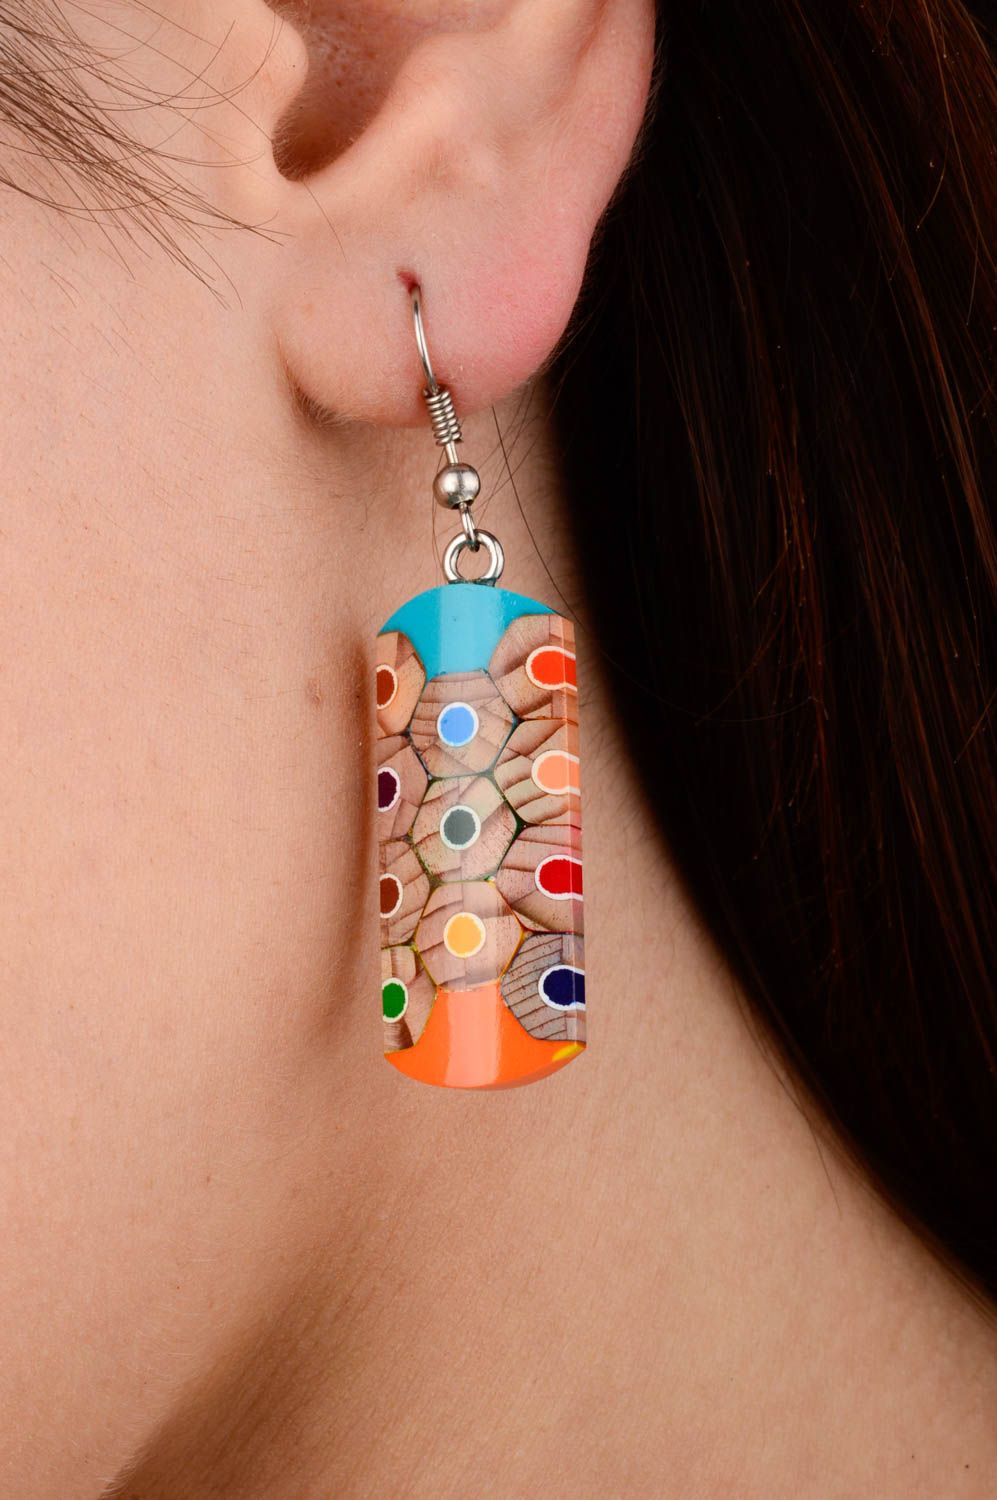 Handmade designer jewelry wooden earrings with charms fashion jewelry for women photo 2